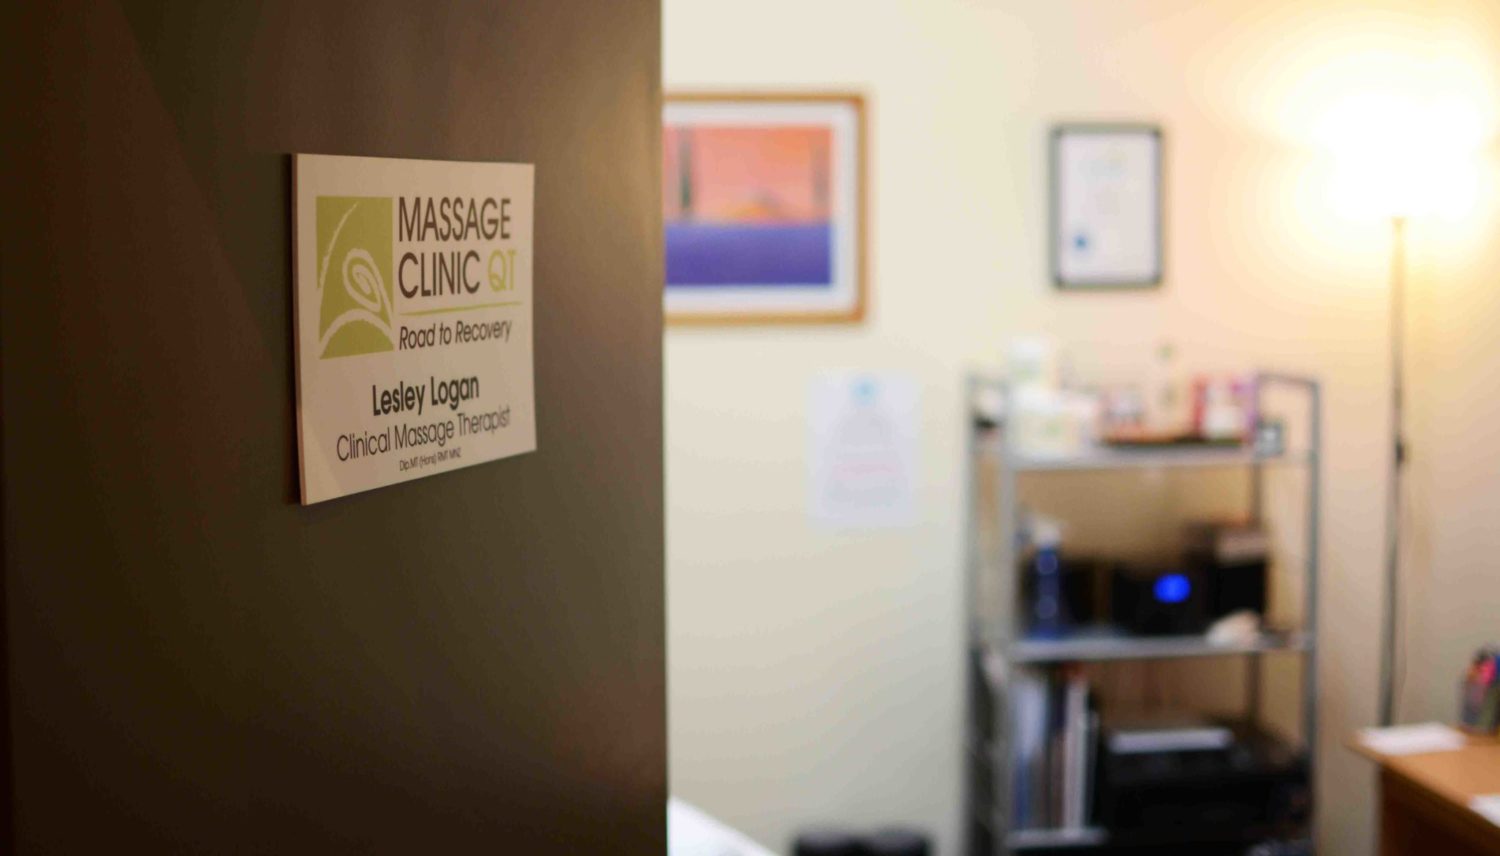 Lesley Logan of Massage QT started on her journey to becoming a clinic massage therapist after needing its services for 